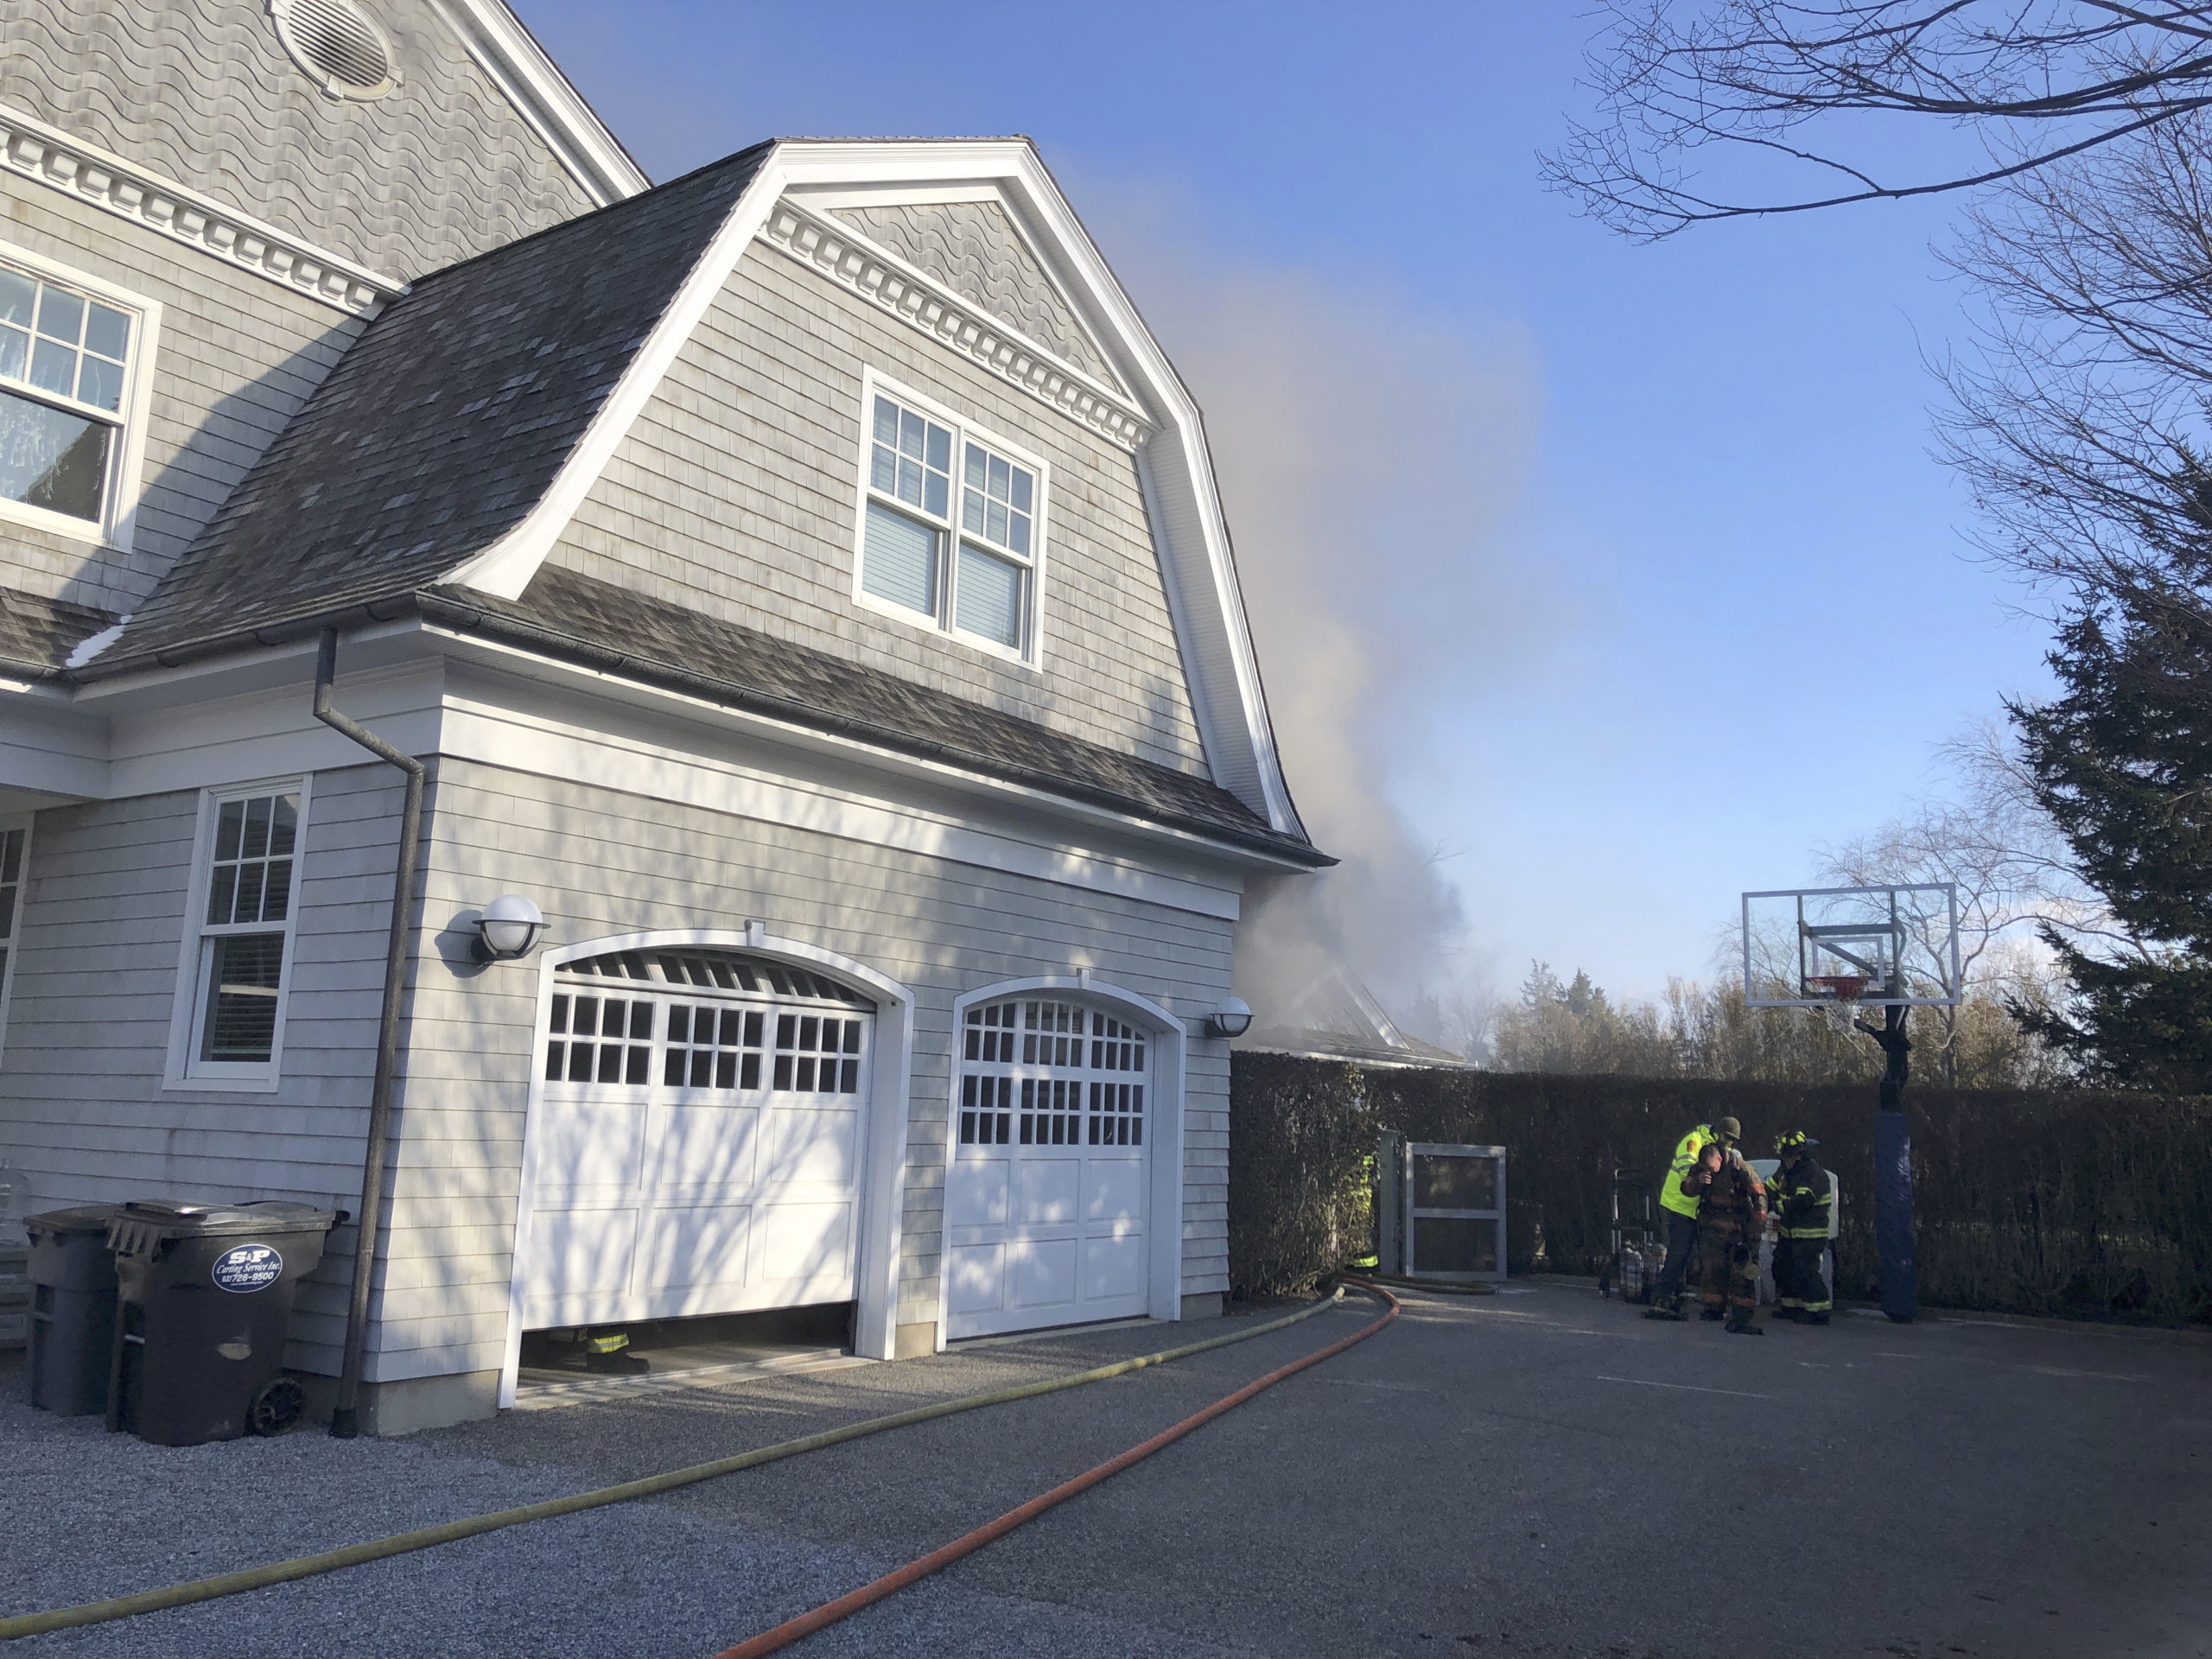 Multiple fire departments are responding to a structure fire in Bridgehampton.